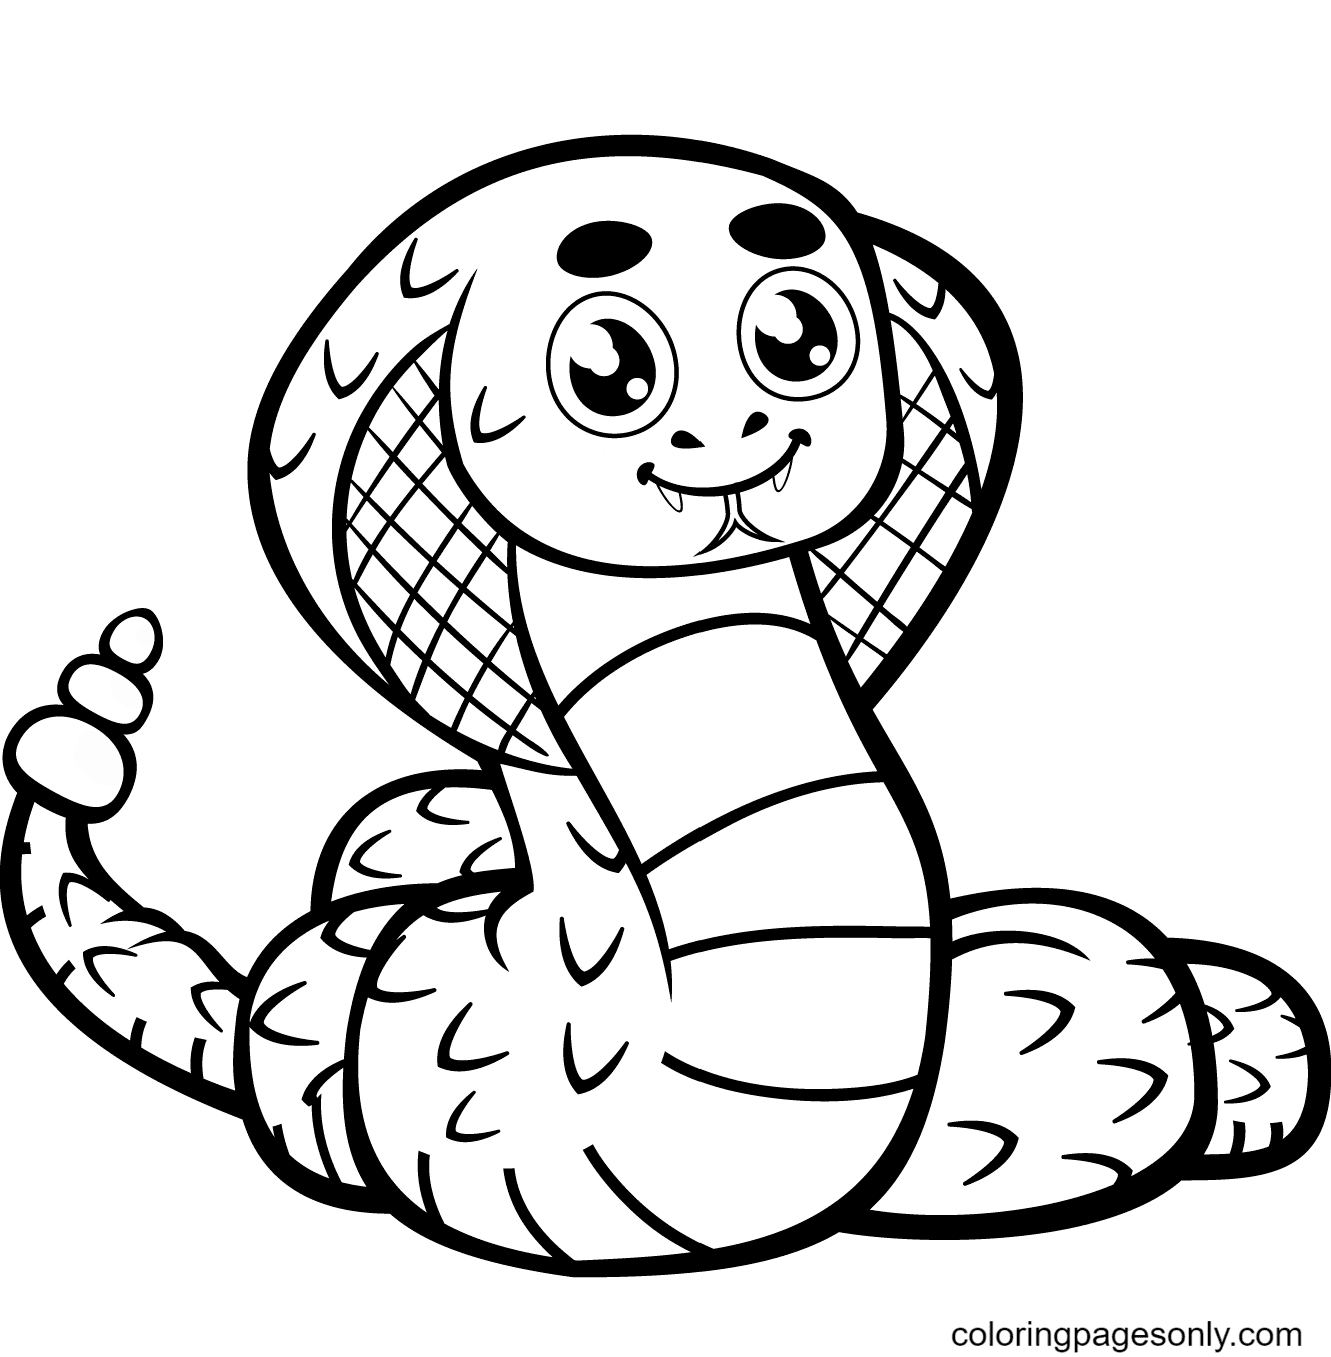 Cute Cobra Coloring Pages